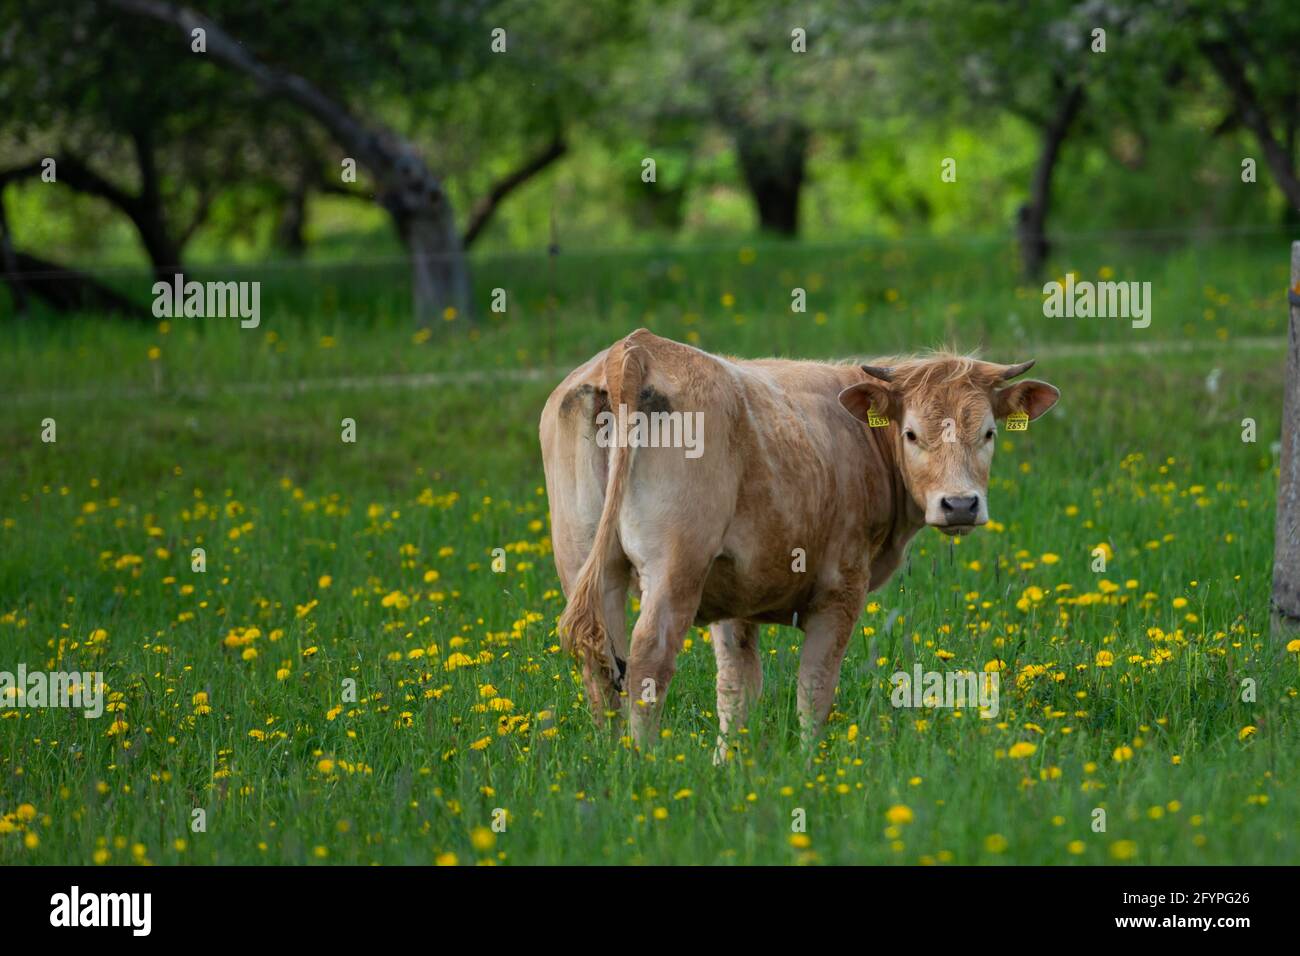 brown beef cow grazes in a dandelion meadow. The cow looks directly into the camera. Stock Photo